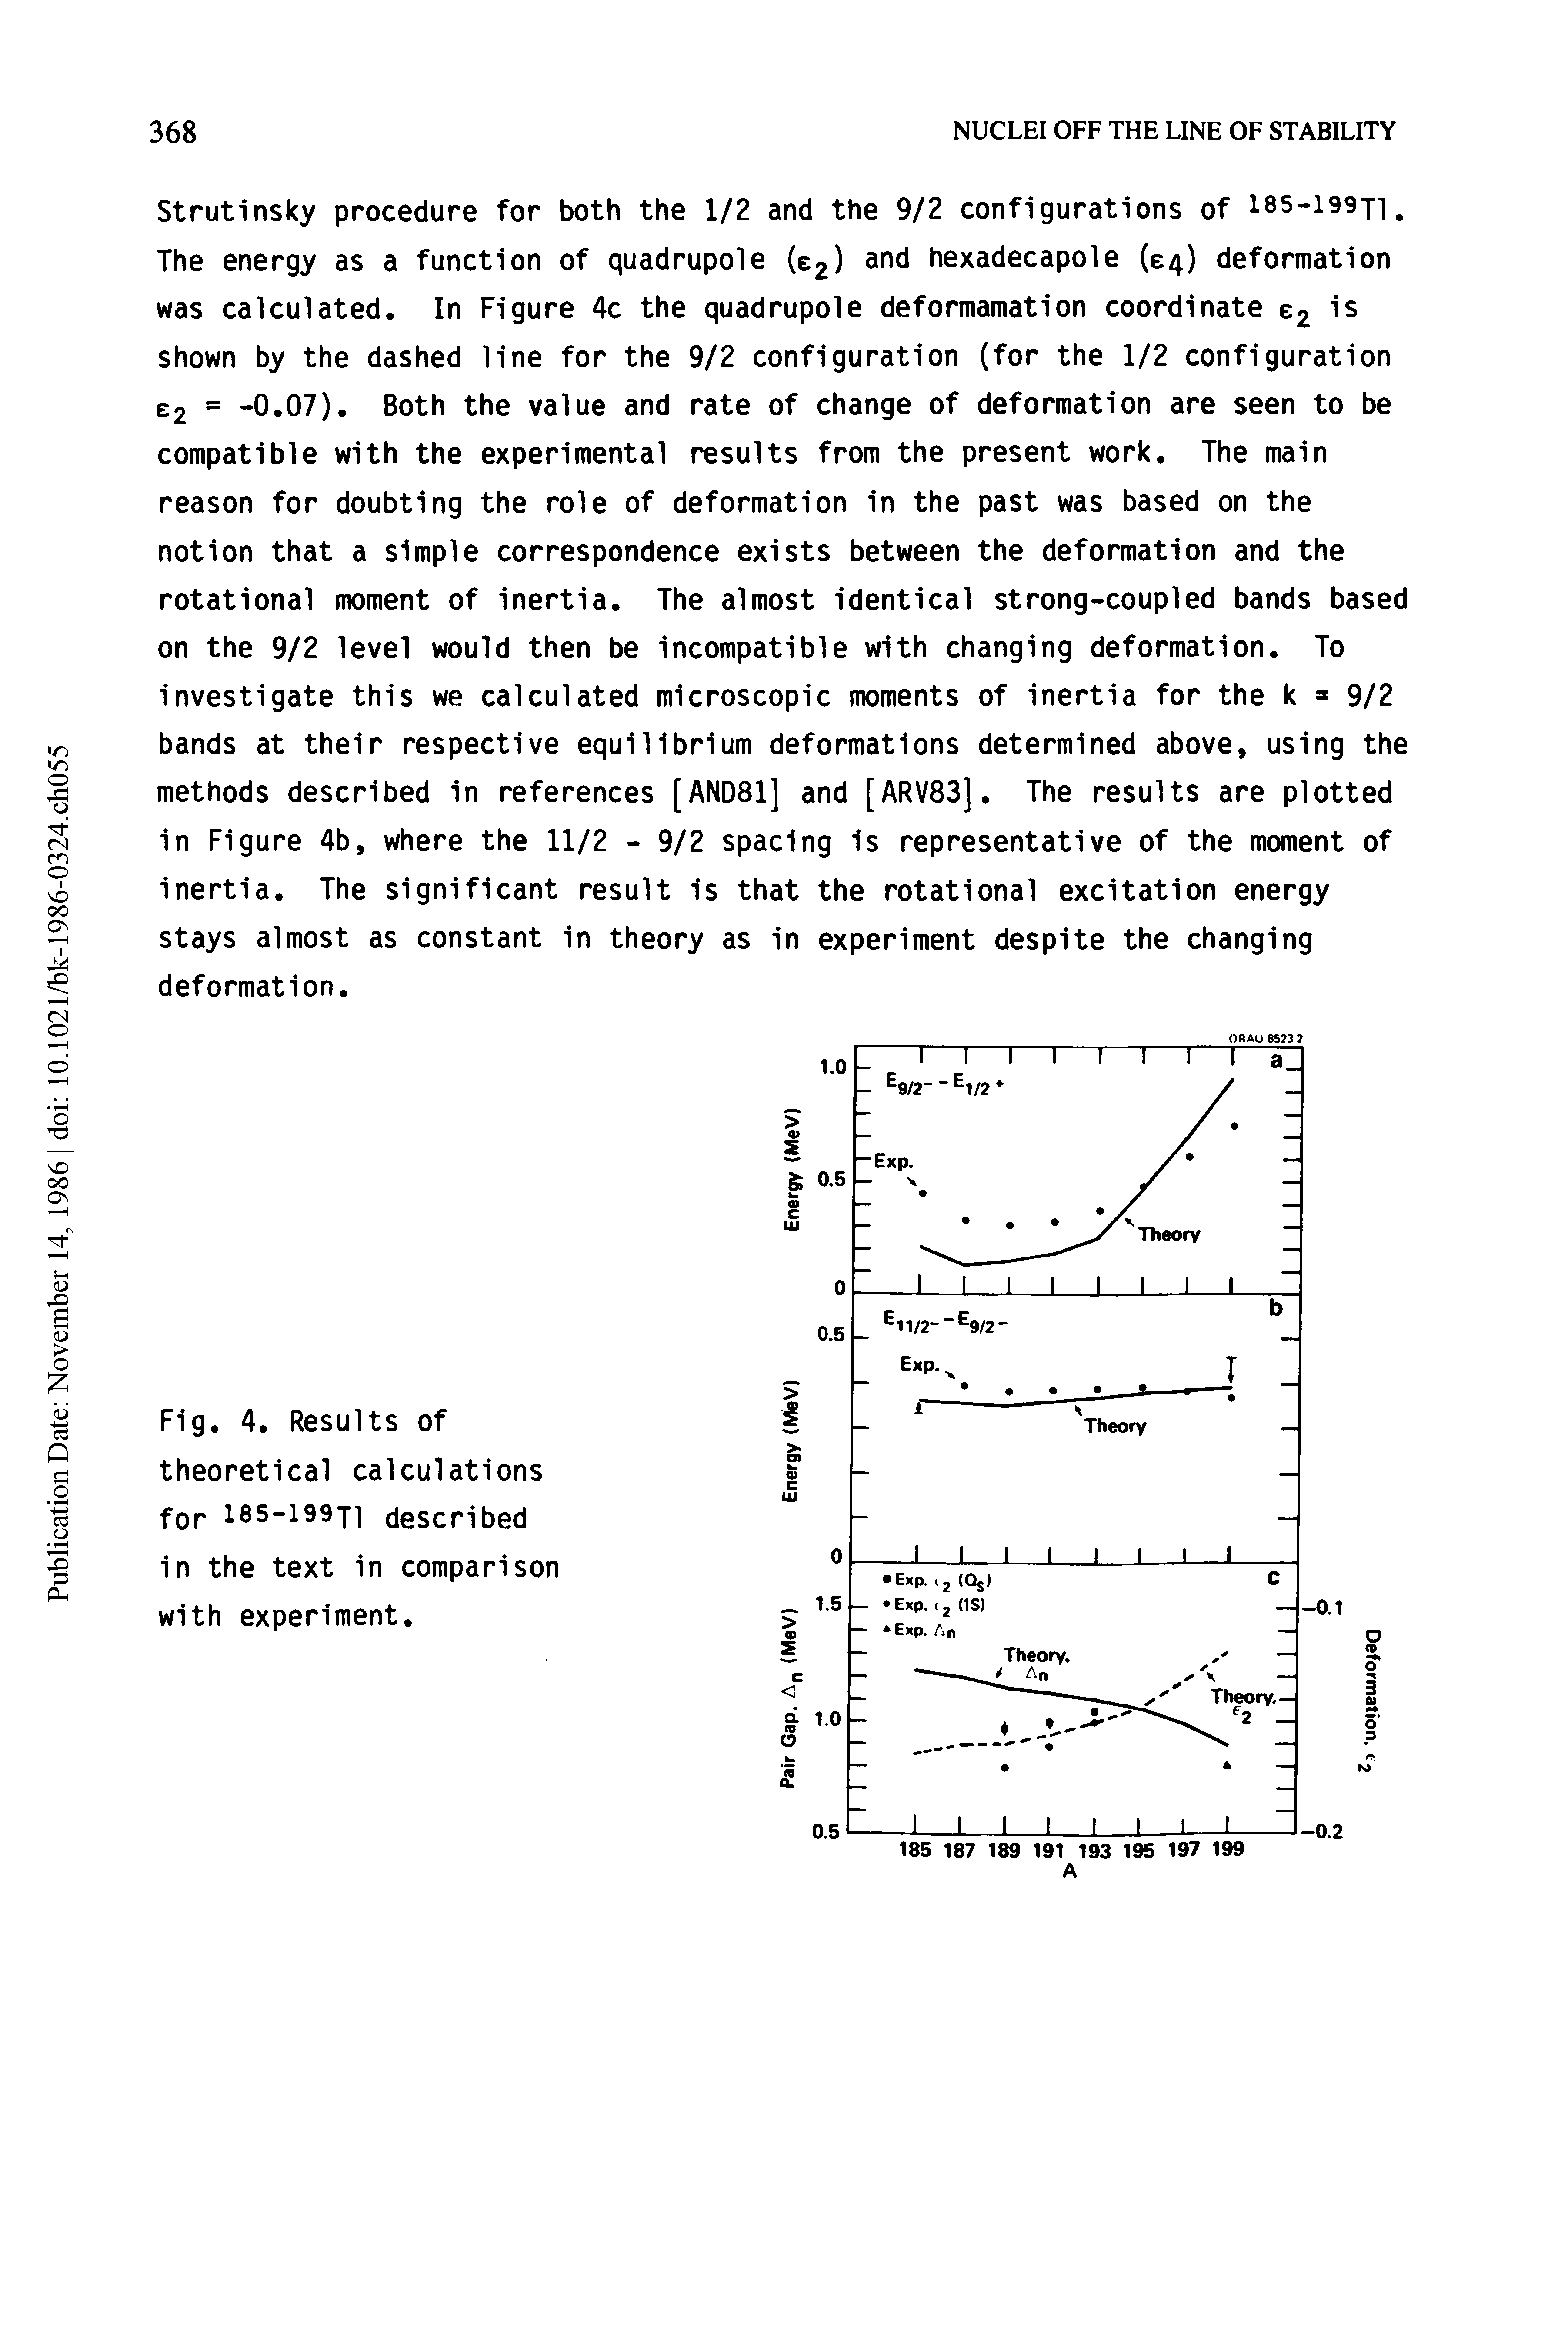 Fig. 4. Results of theoretical calculations f0r 185-I99i" described in the text in comparison with experiment.